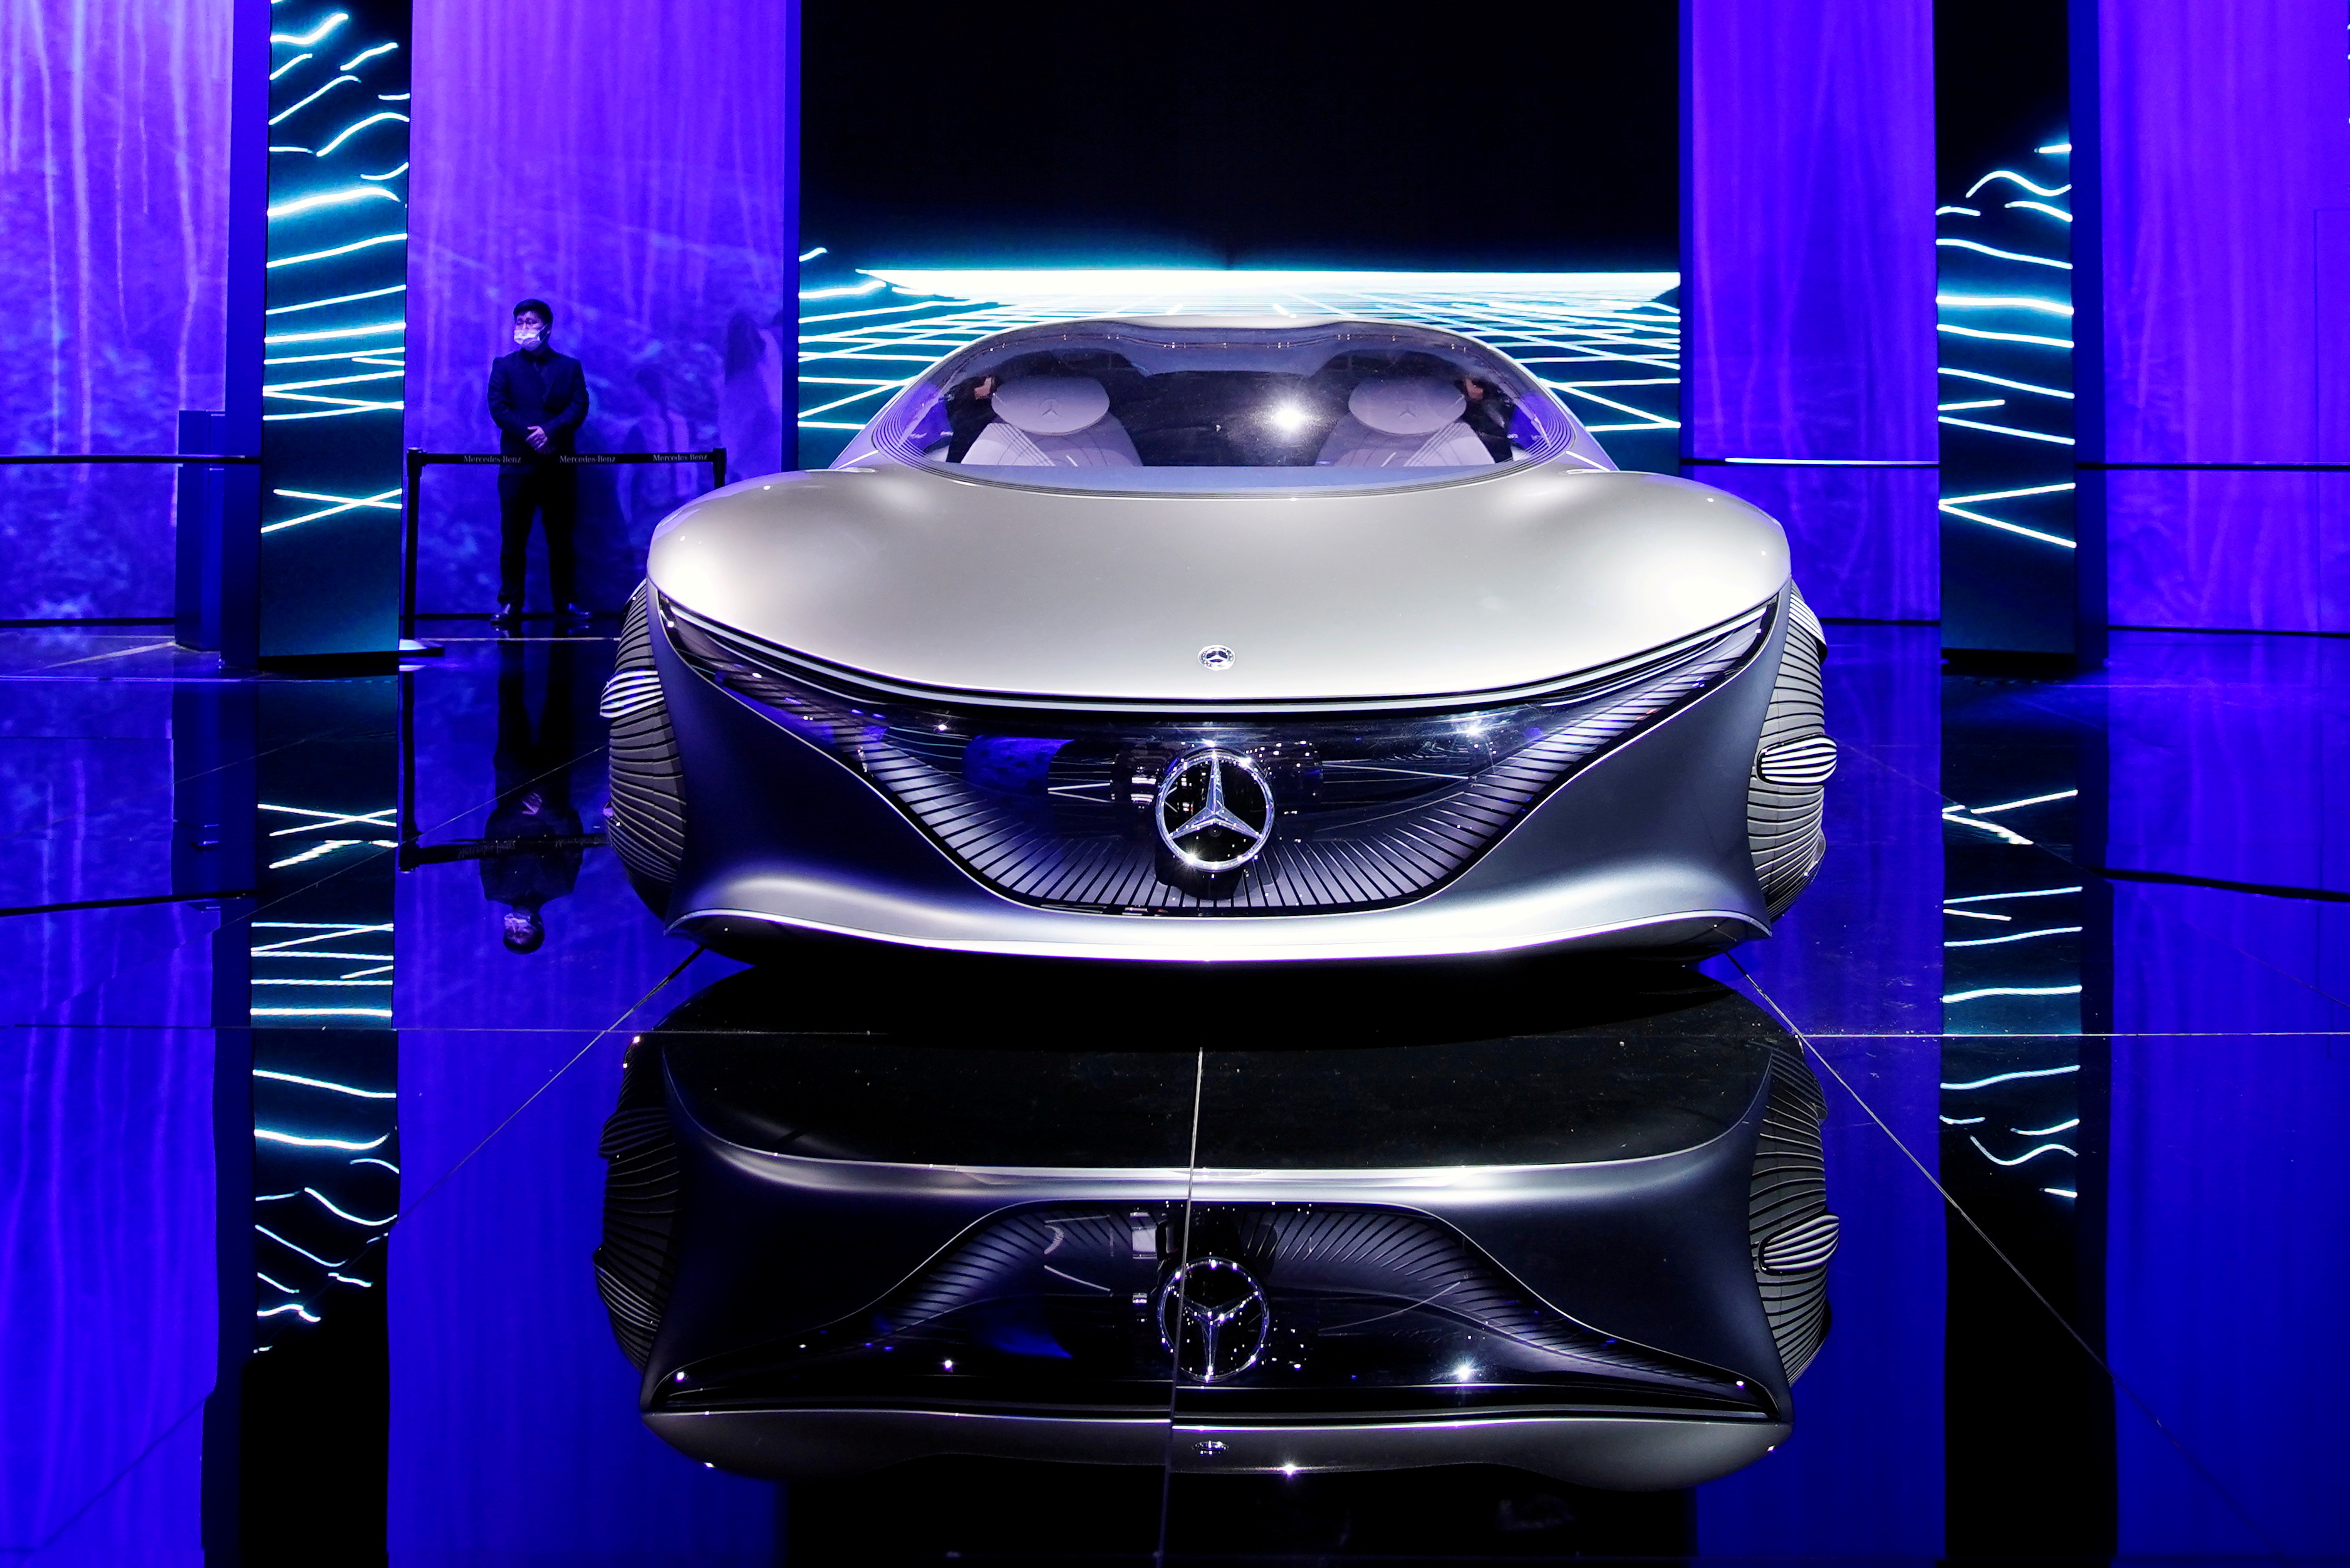 A Mercedes-Benz Vision AVTR concept vehicle is displayed during a media day at the Auto Shanghai show in Shanghai